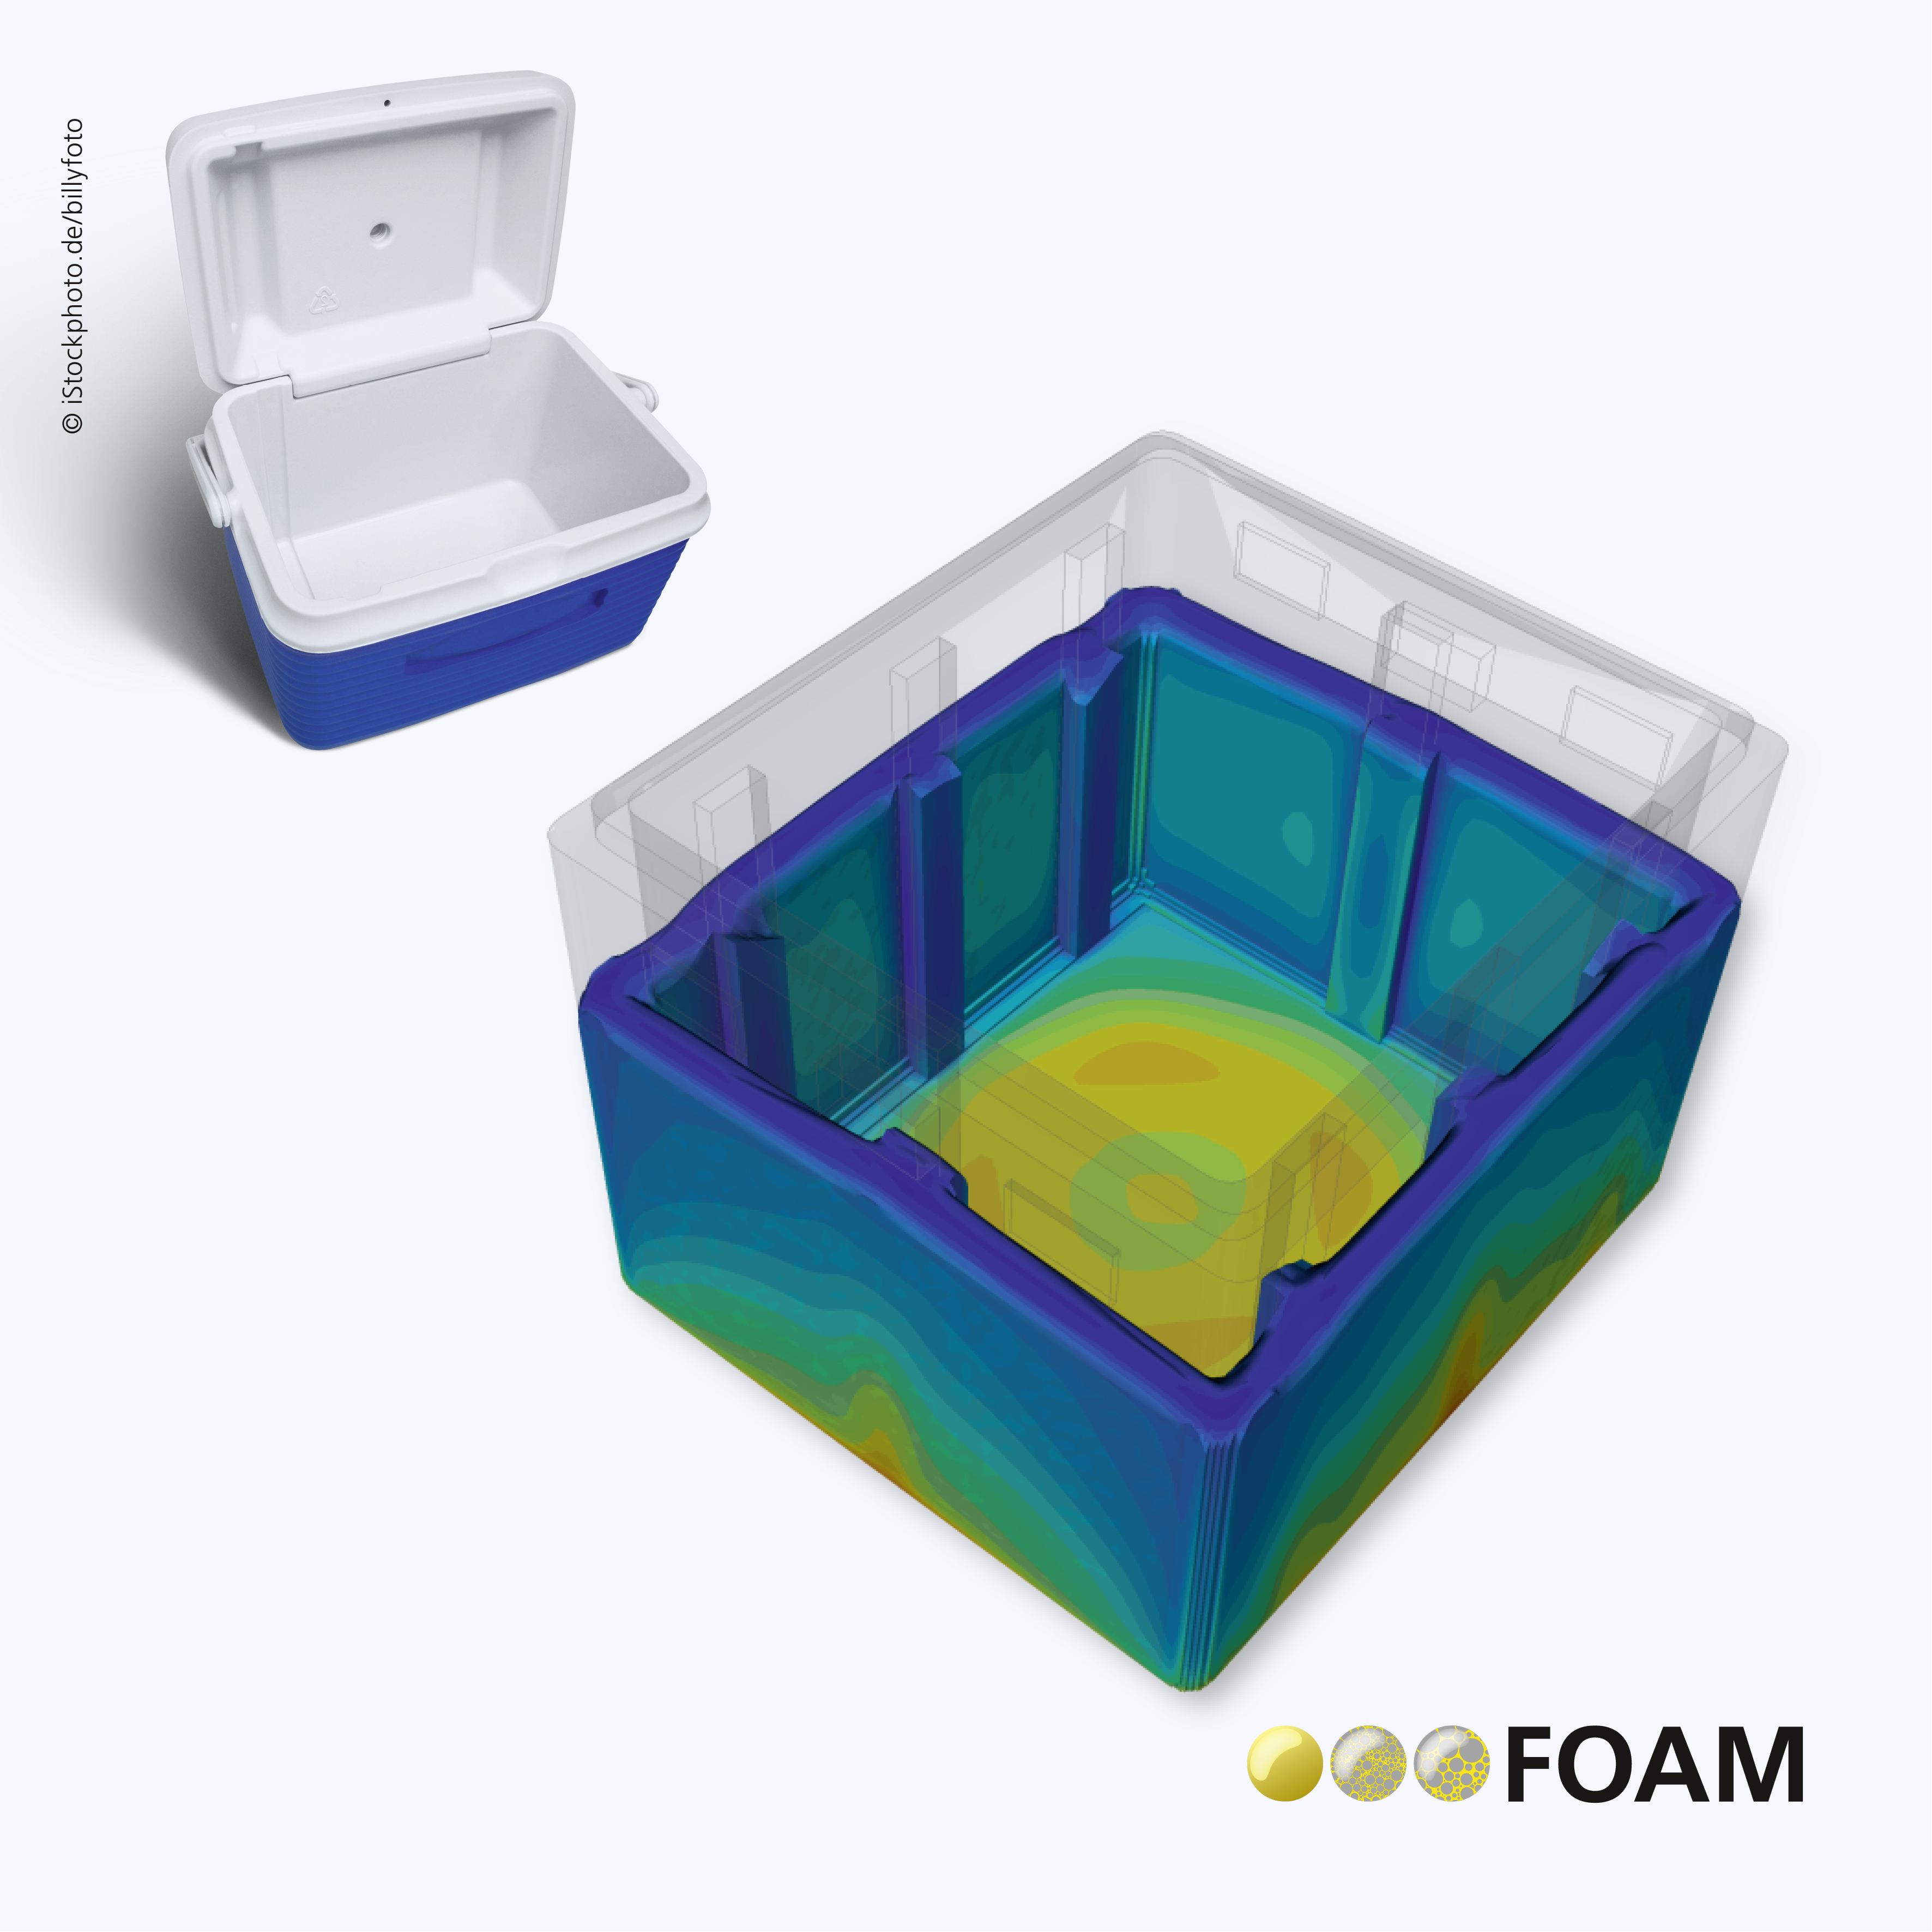 PU expansion simulation with FOAM for manufacturing a cooler.